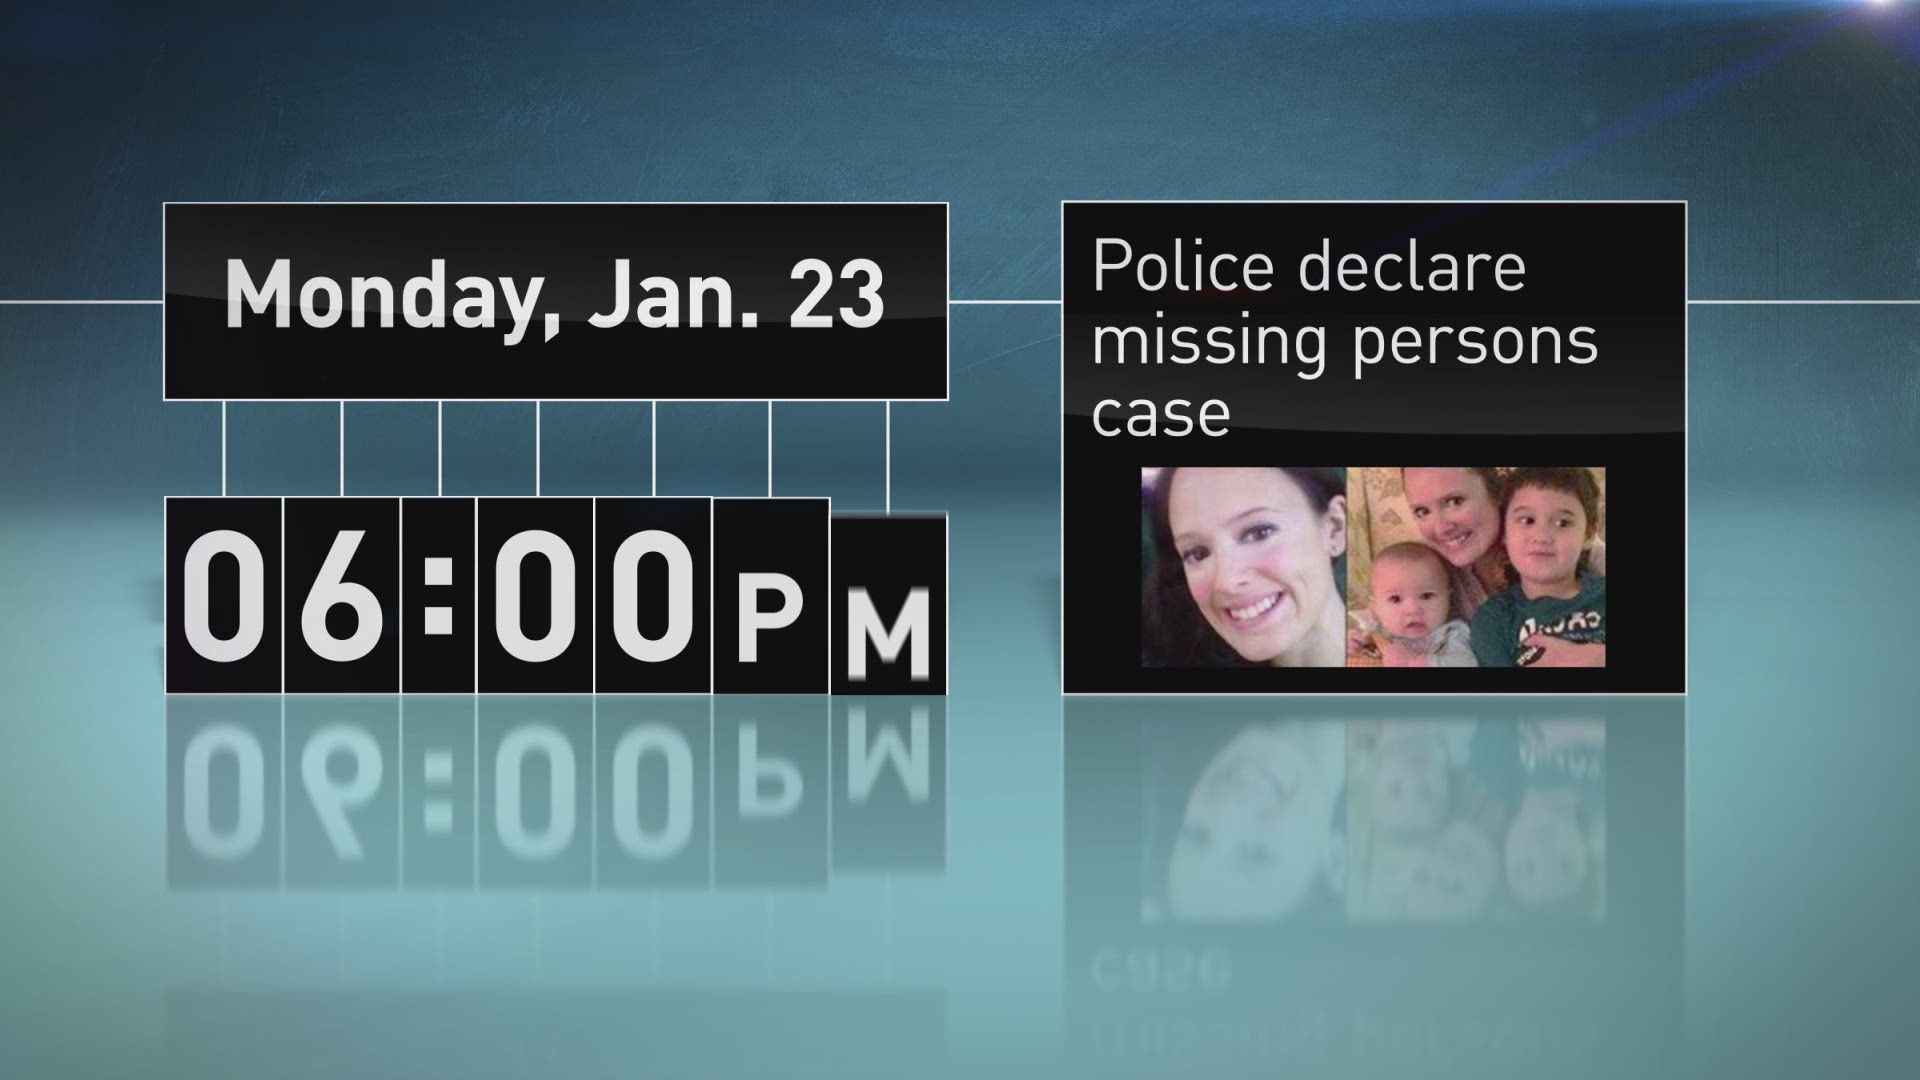 Here's the timeline of events that show circumstances surrounding Monica Lamping's disappearance.